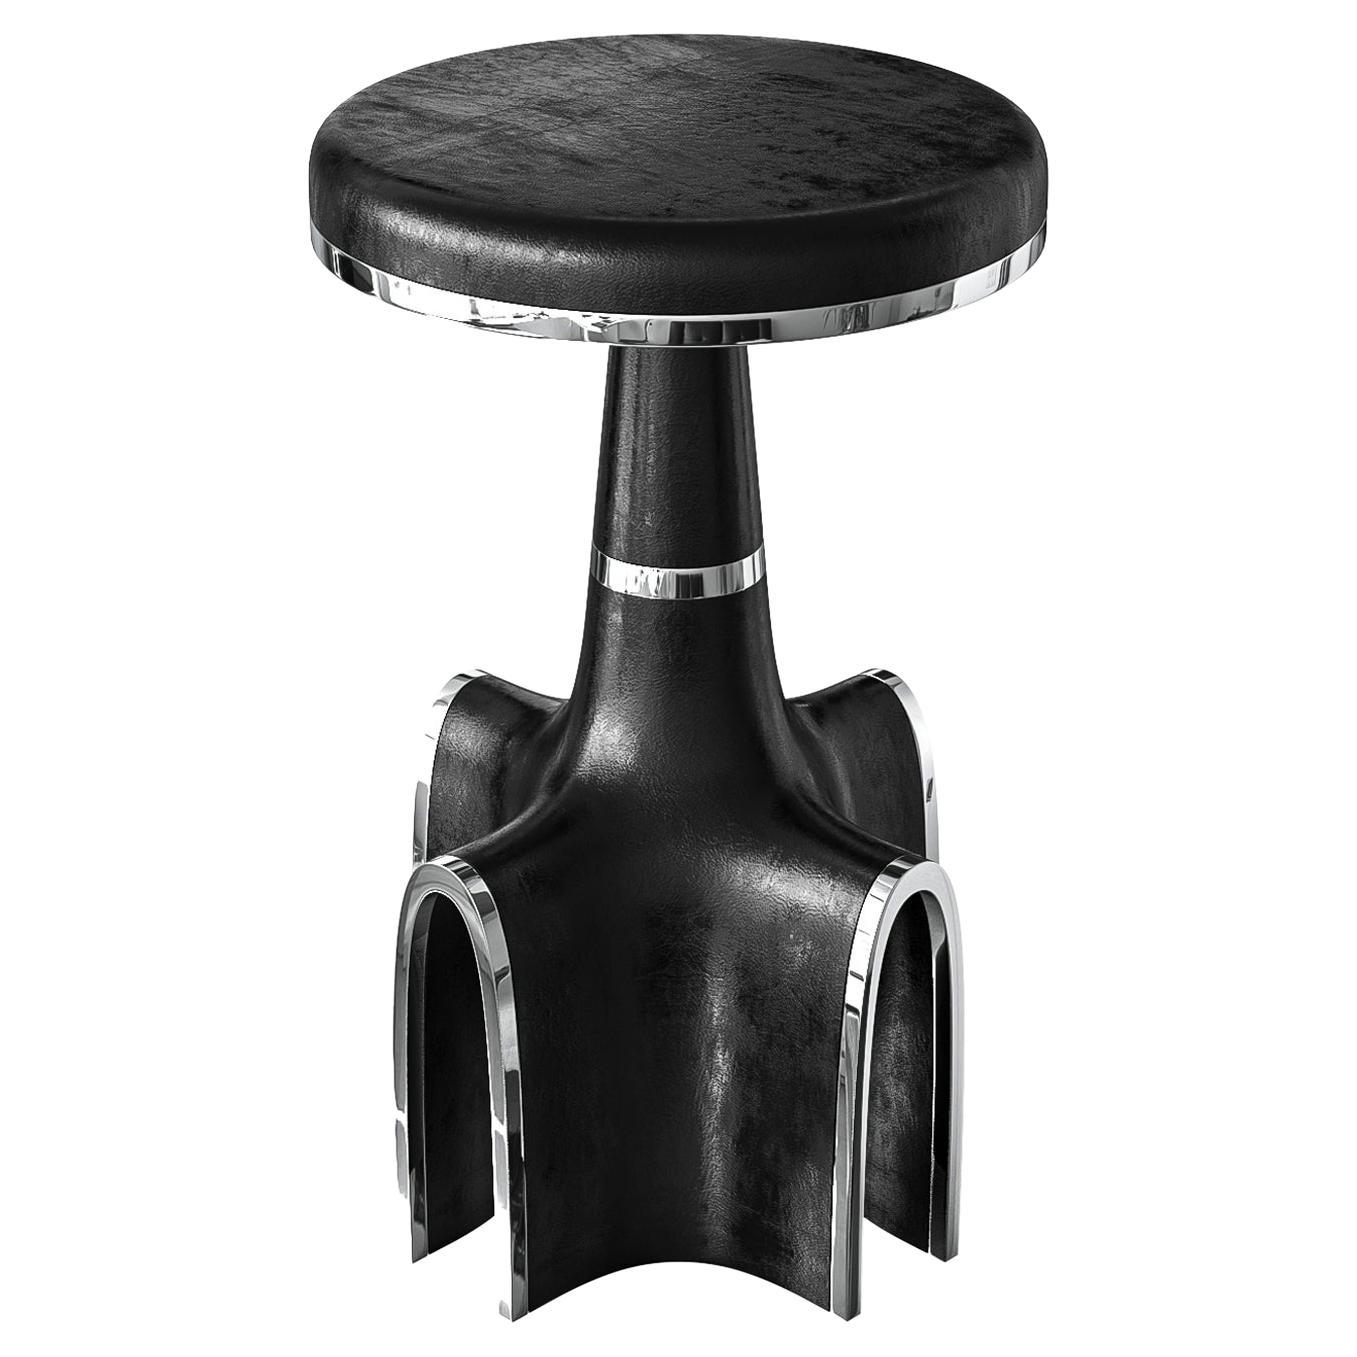 "Quartina" Bar Stool with Stainless Steel, Istanbul